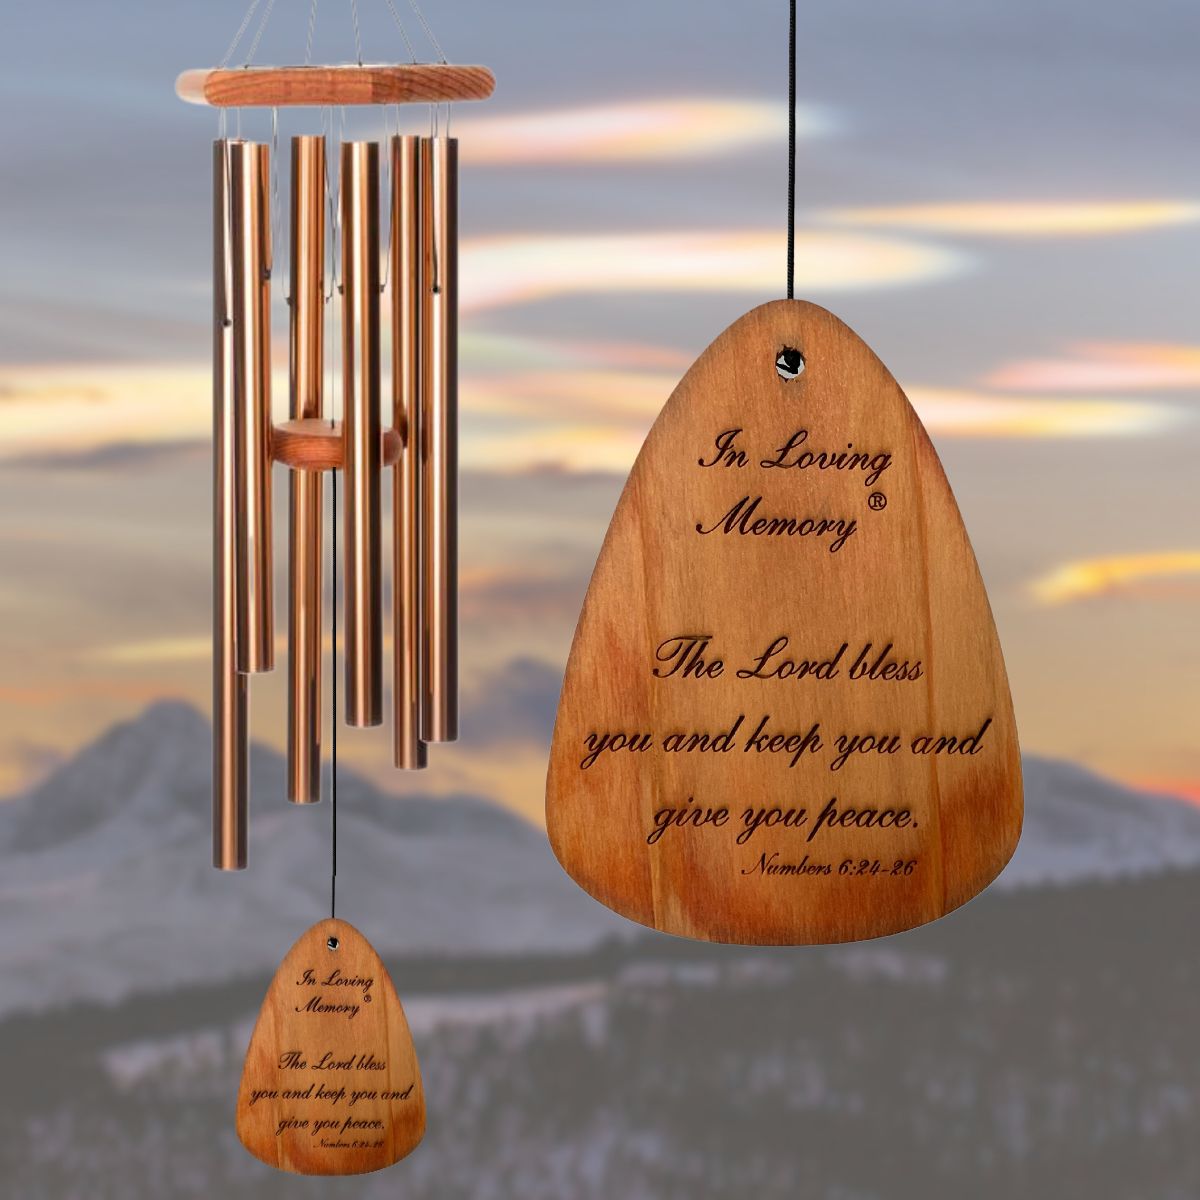 In Loving Memory 35 Inch Windchime - The Lord bless you and keep you... in Bronze